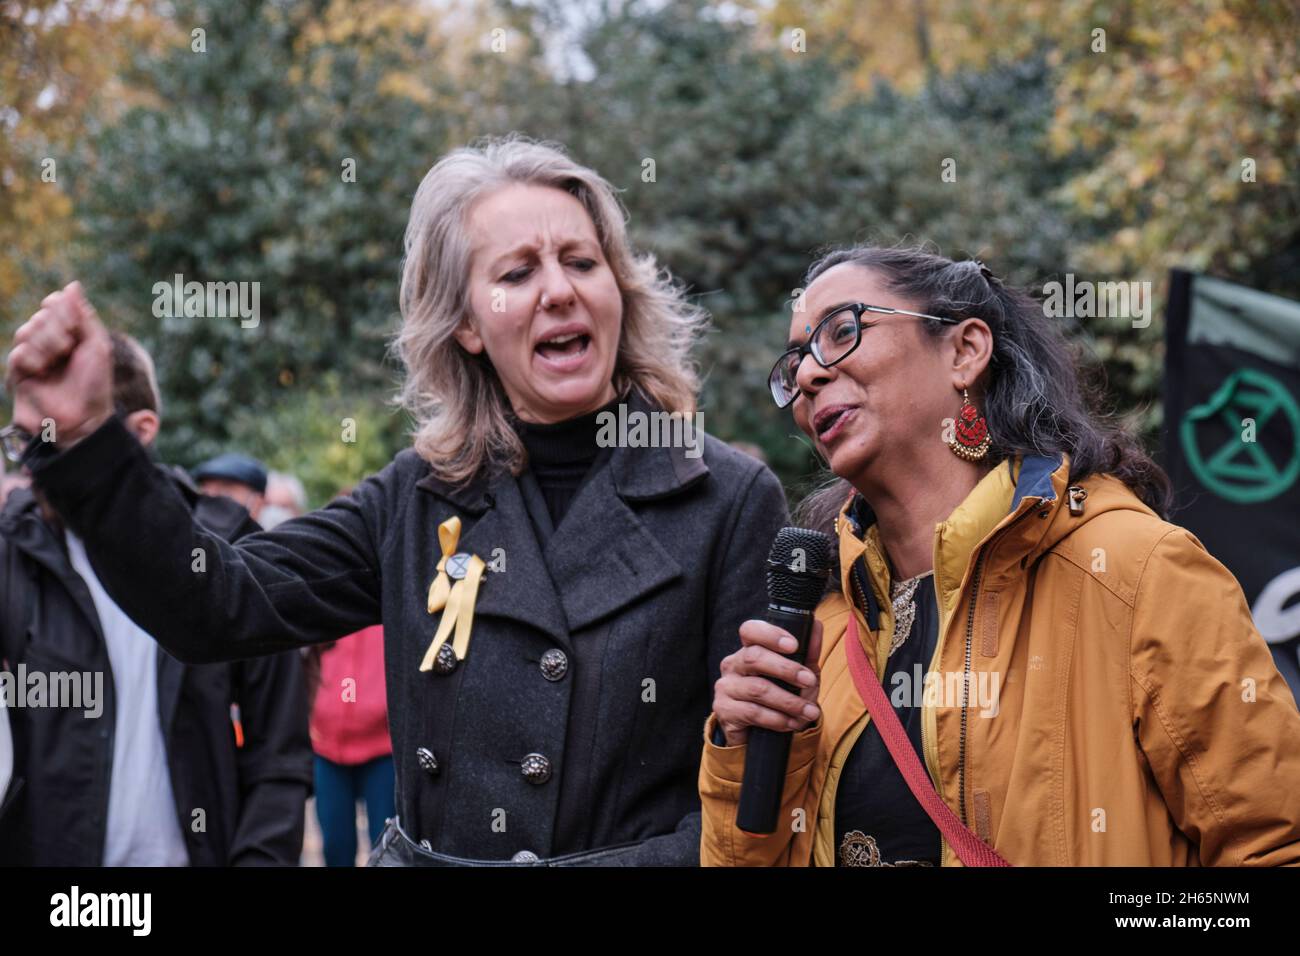 London, UK. 13th Nov, 2021. Bhavini Patel of XR Unify gives a speach for Extinction Rebellion's activists gathered in Lincoln's Inn Fields, for the Rise and Rebel March to protest for the climate emergency, following COP26 summit. Credit: Chiara Fabbro/Alamy Live News Stock Photo